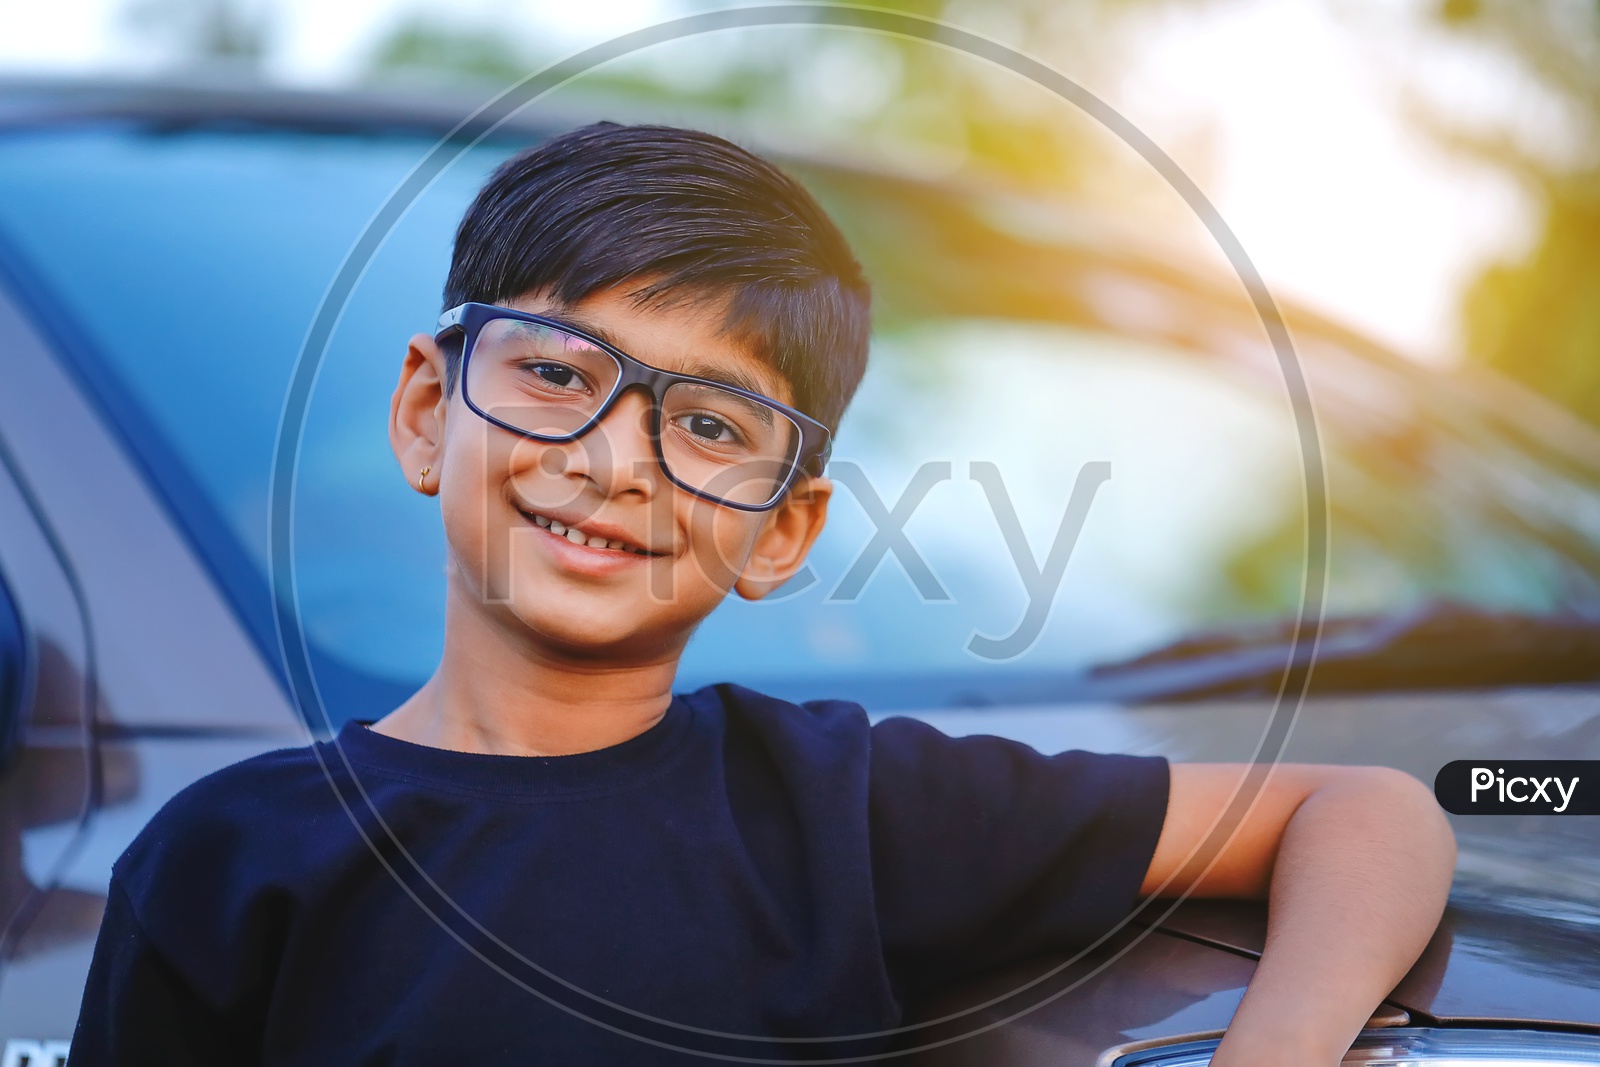 Indian Young Kid or Child Wearing Spectacles And Posing